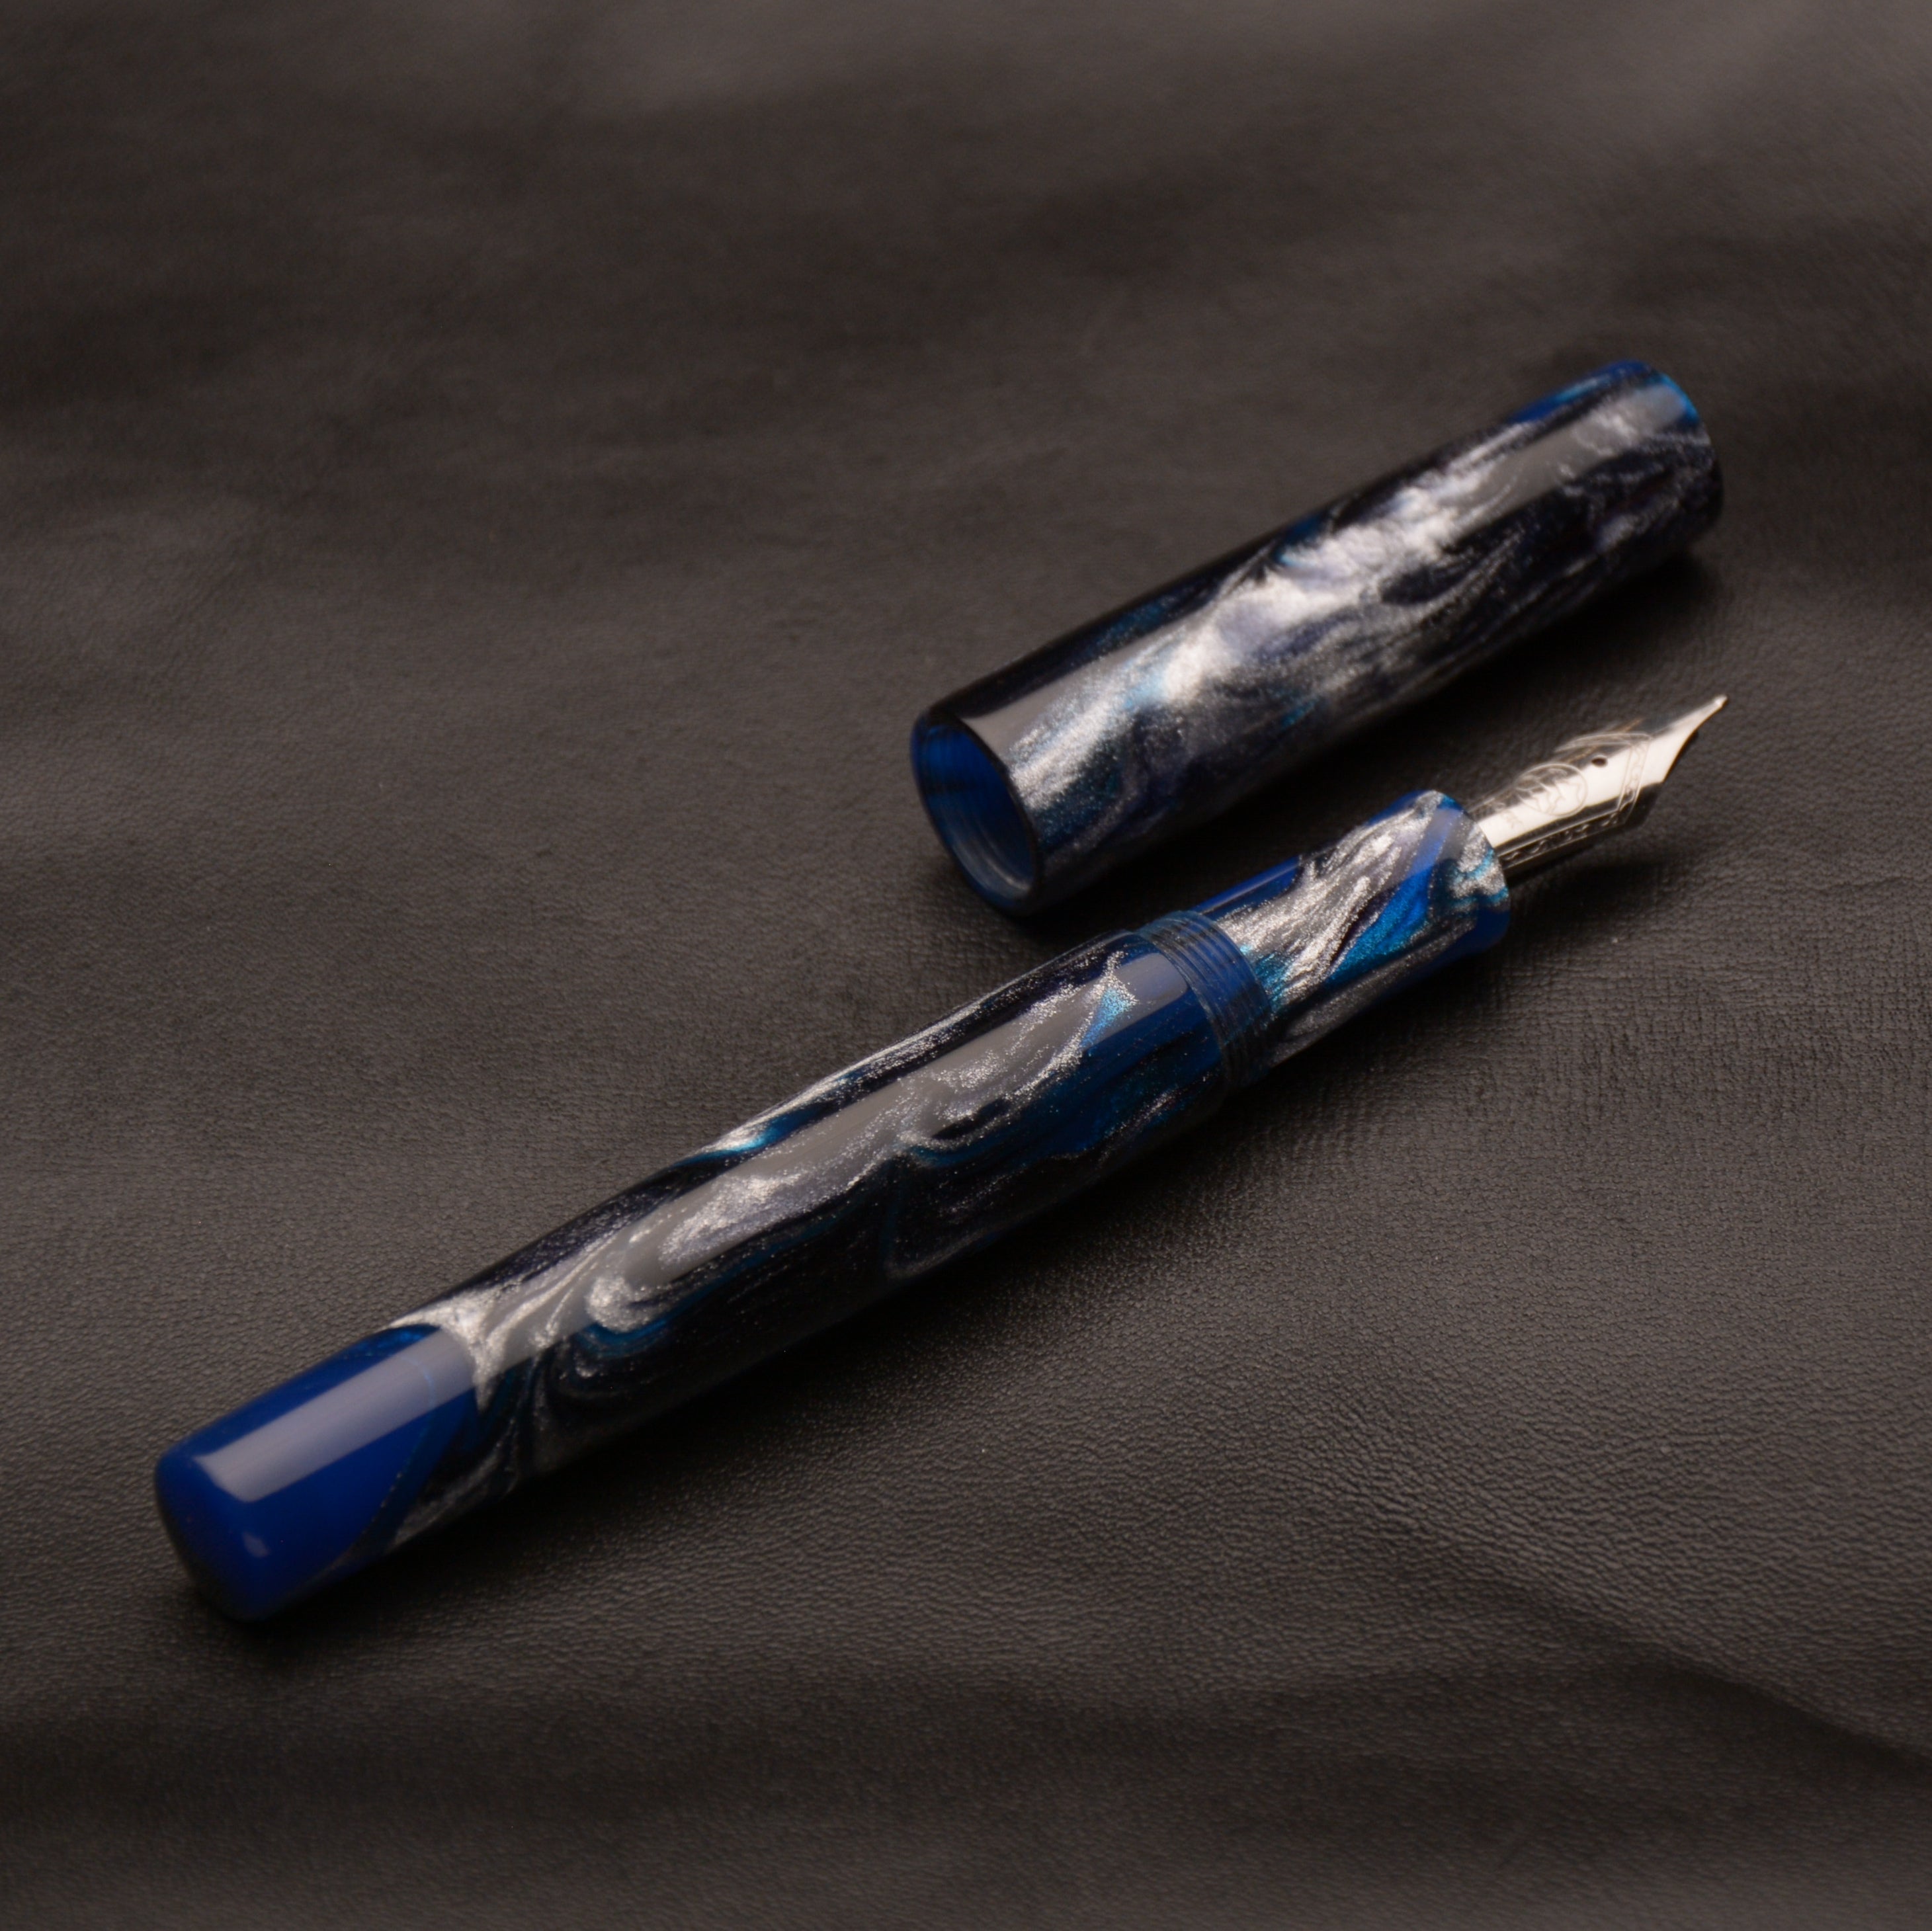 Fountain Pen - Bock #6 - 13 mm - In-house cast with blue, black and metallic silver